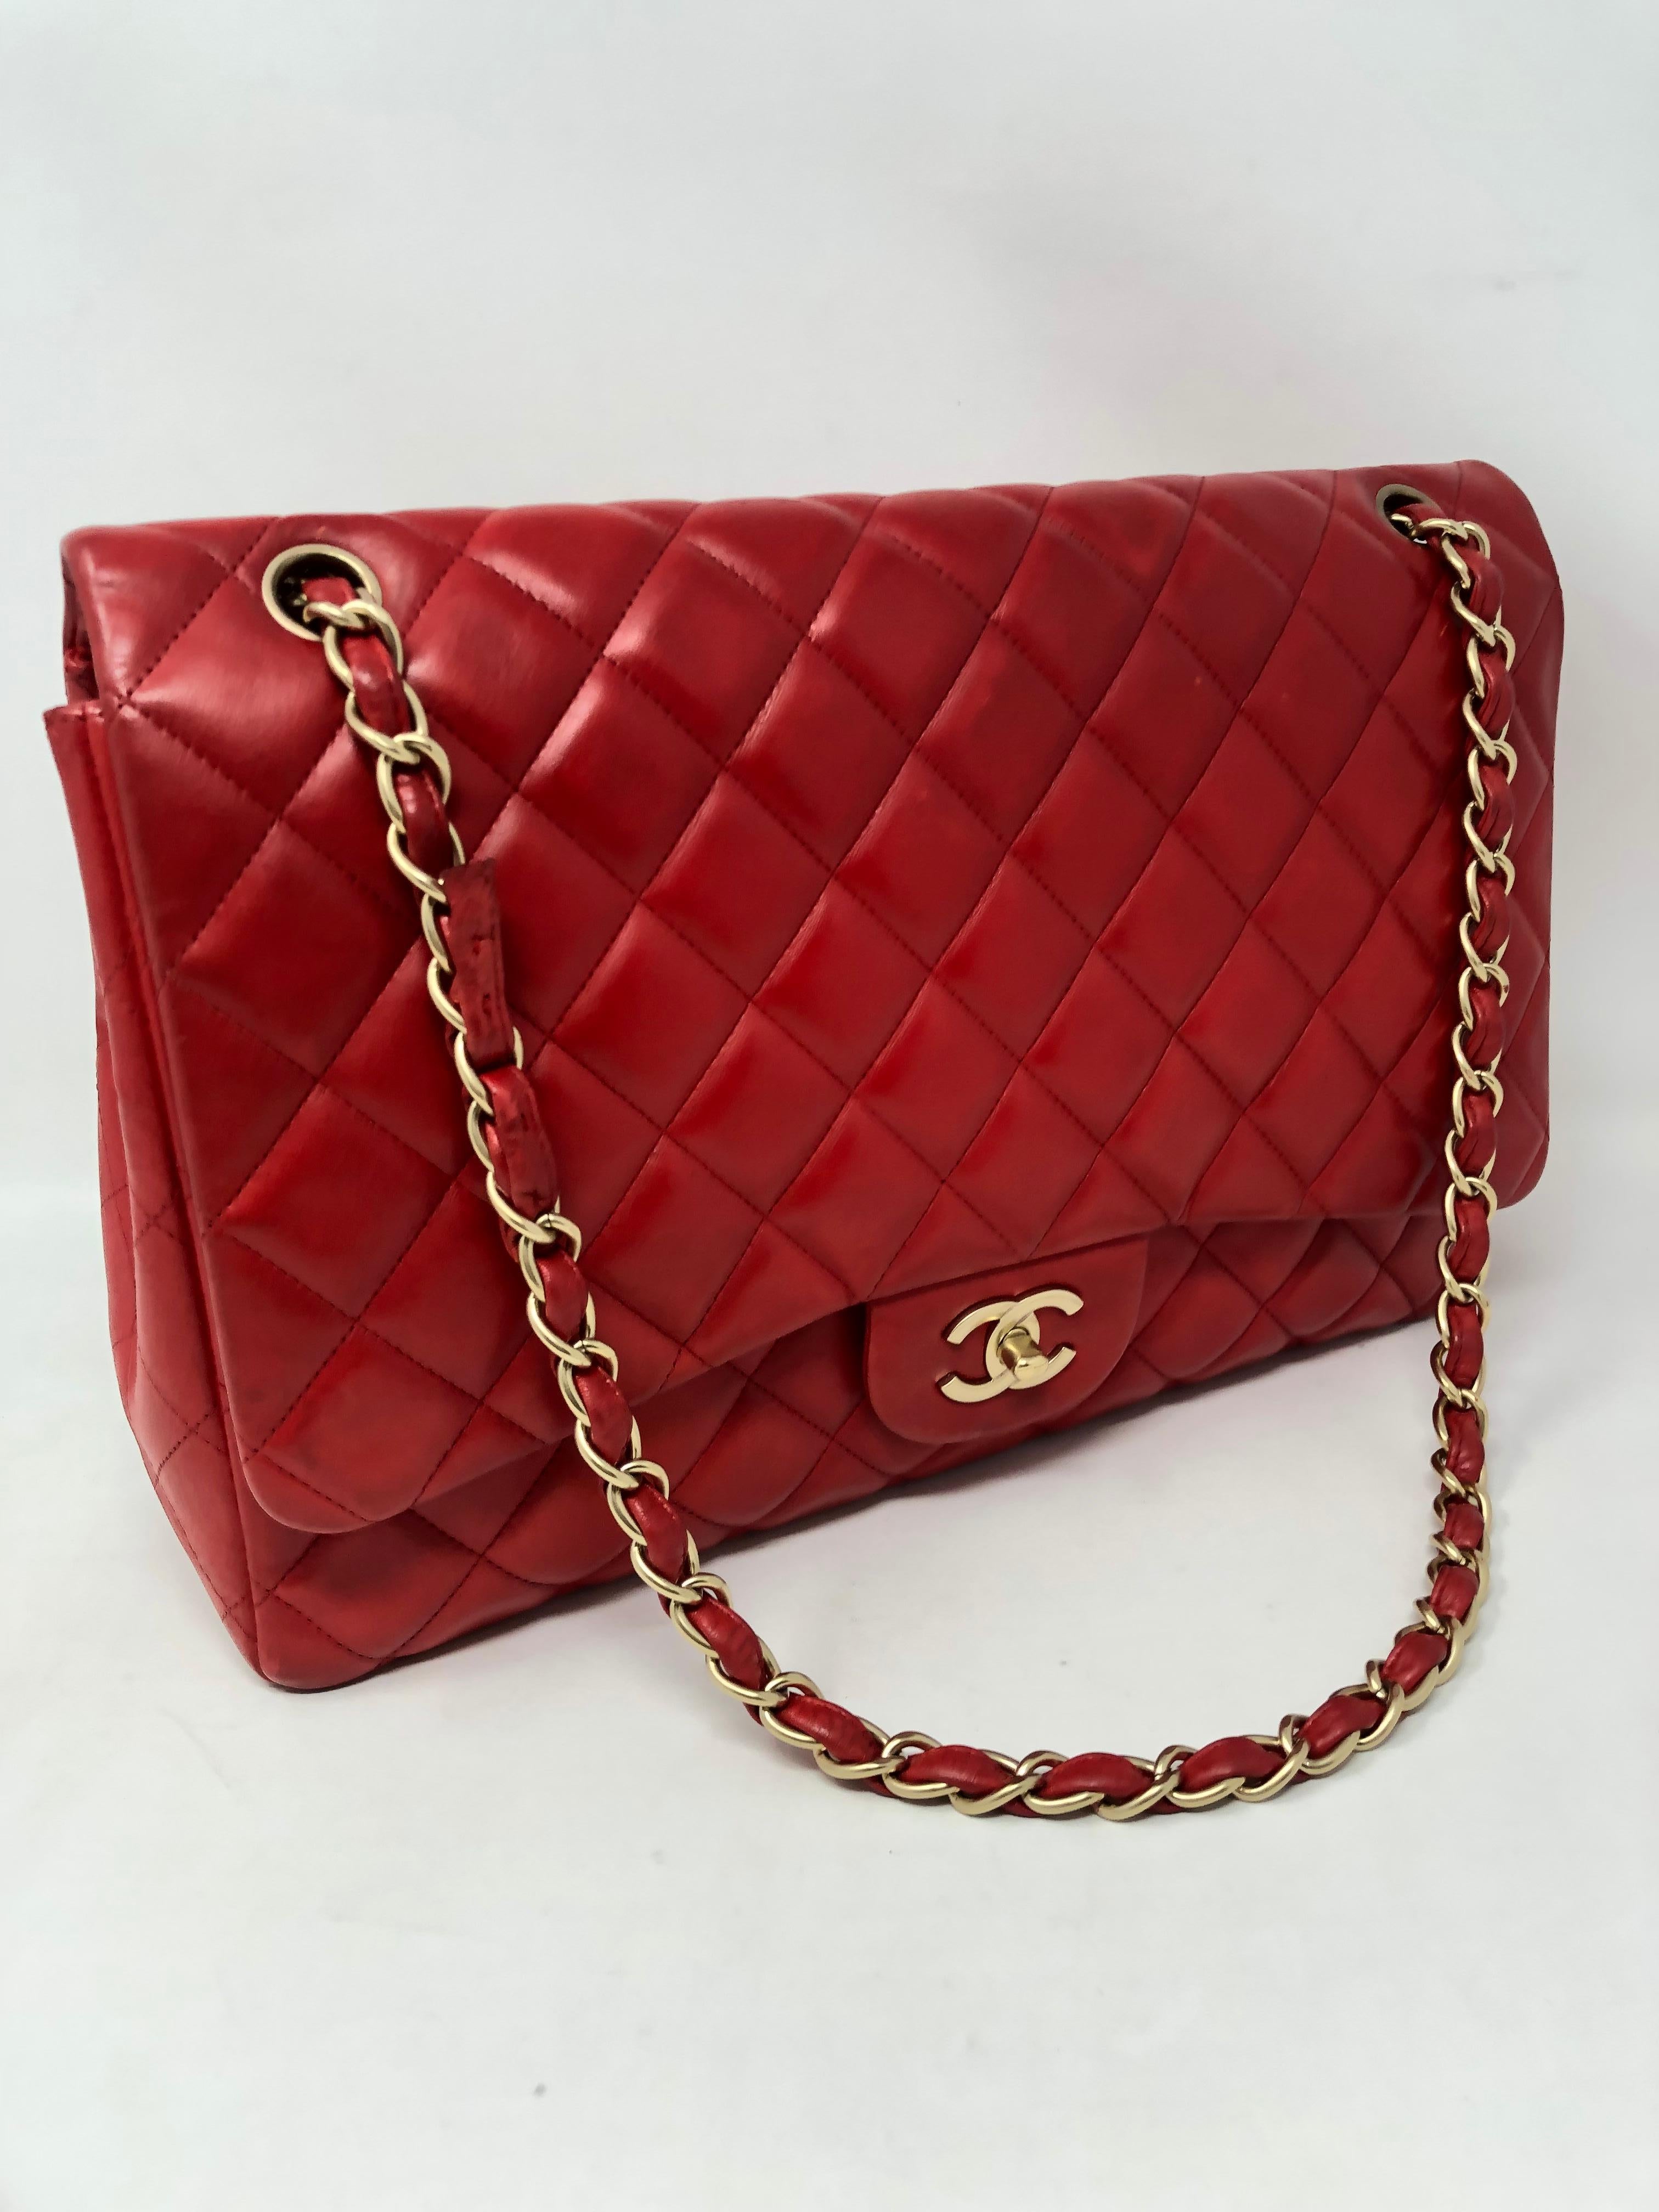 Brown Chanel Red Maxi Bag